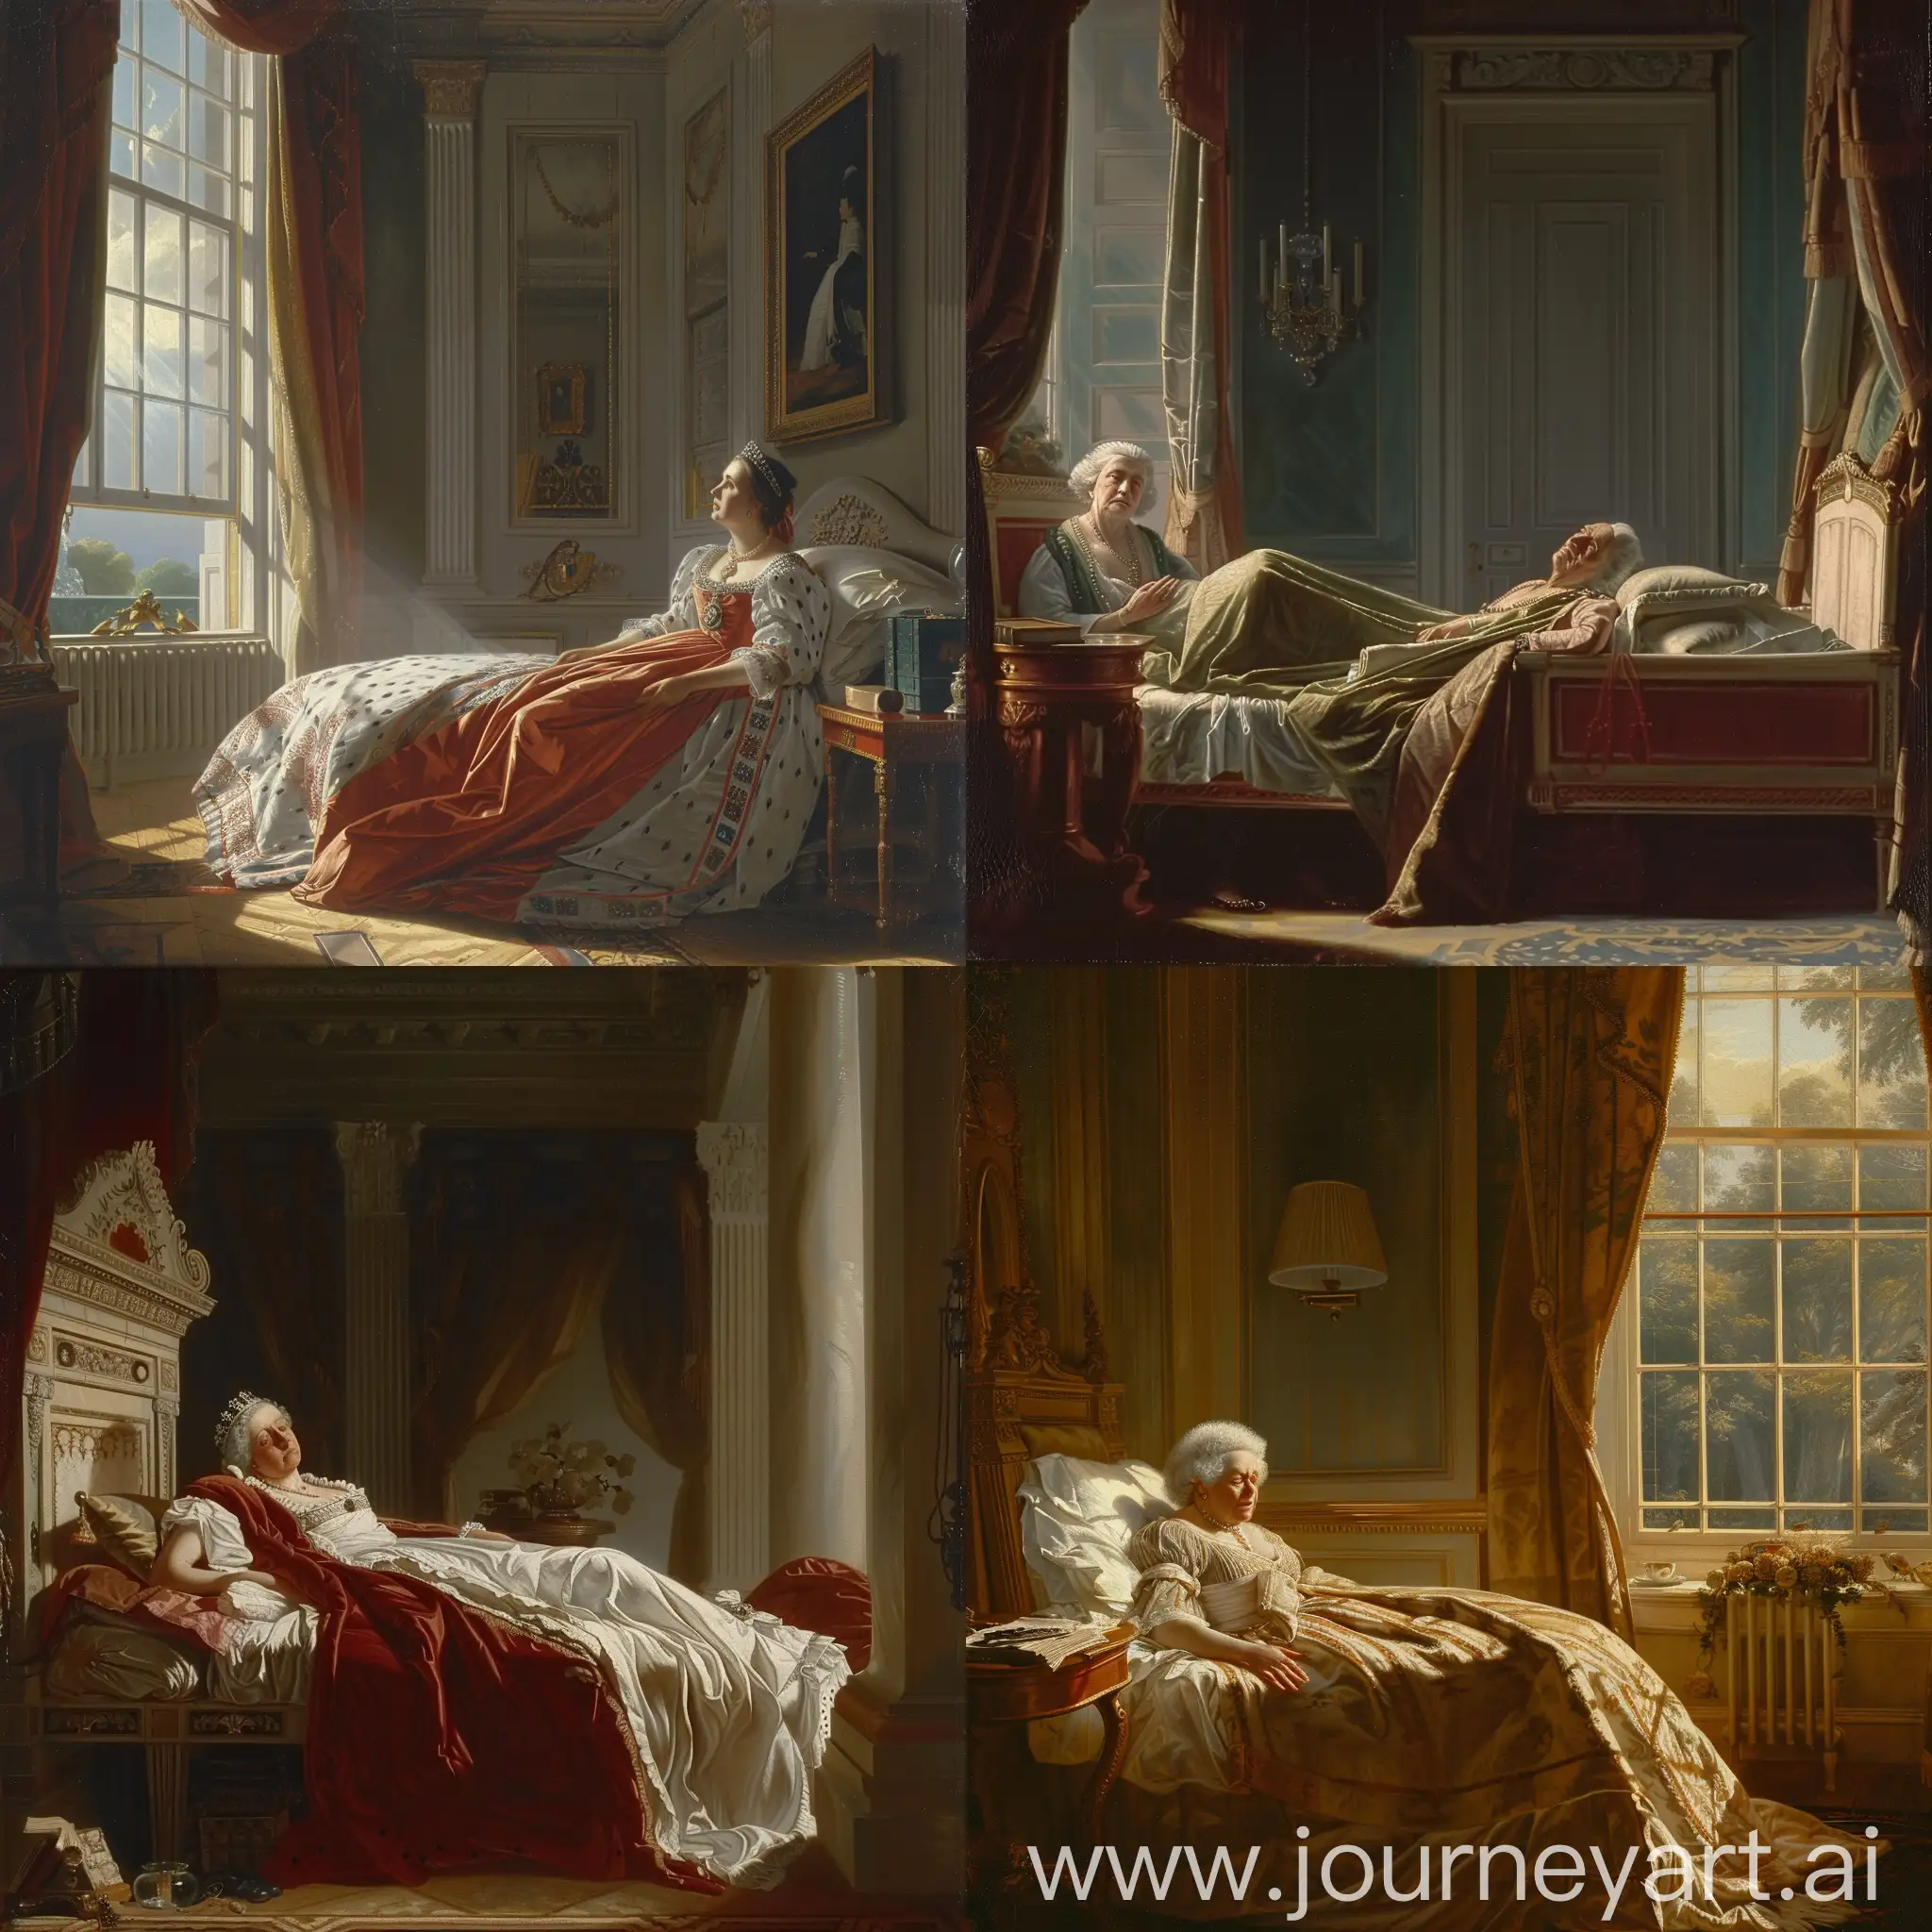 Queen Charlotte died in her bedroom in Kew Palace on 17 November 1818. She was 74 years old. The queen had been suffering from a condition called dropsy, which causes swelling and pain
